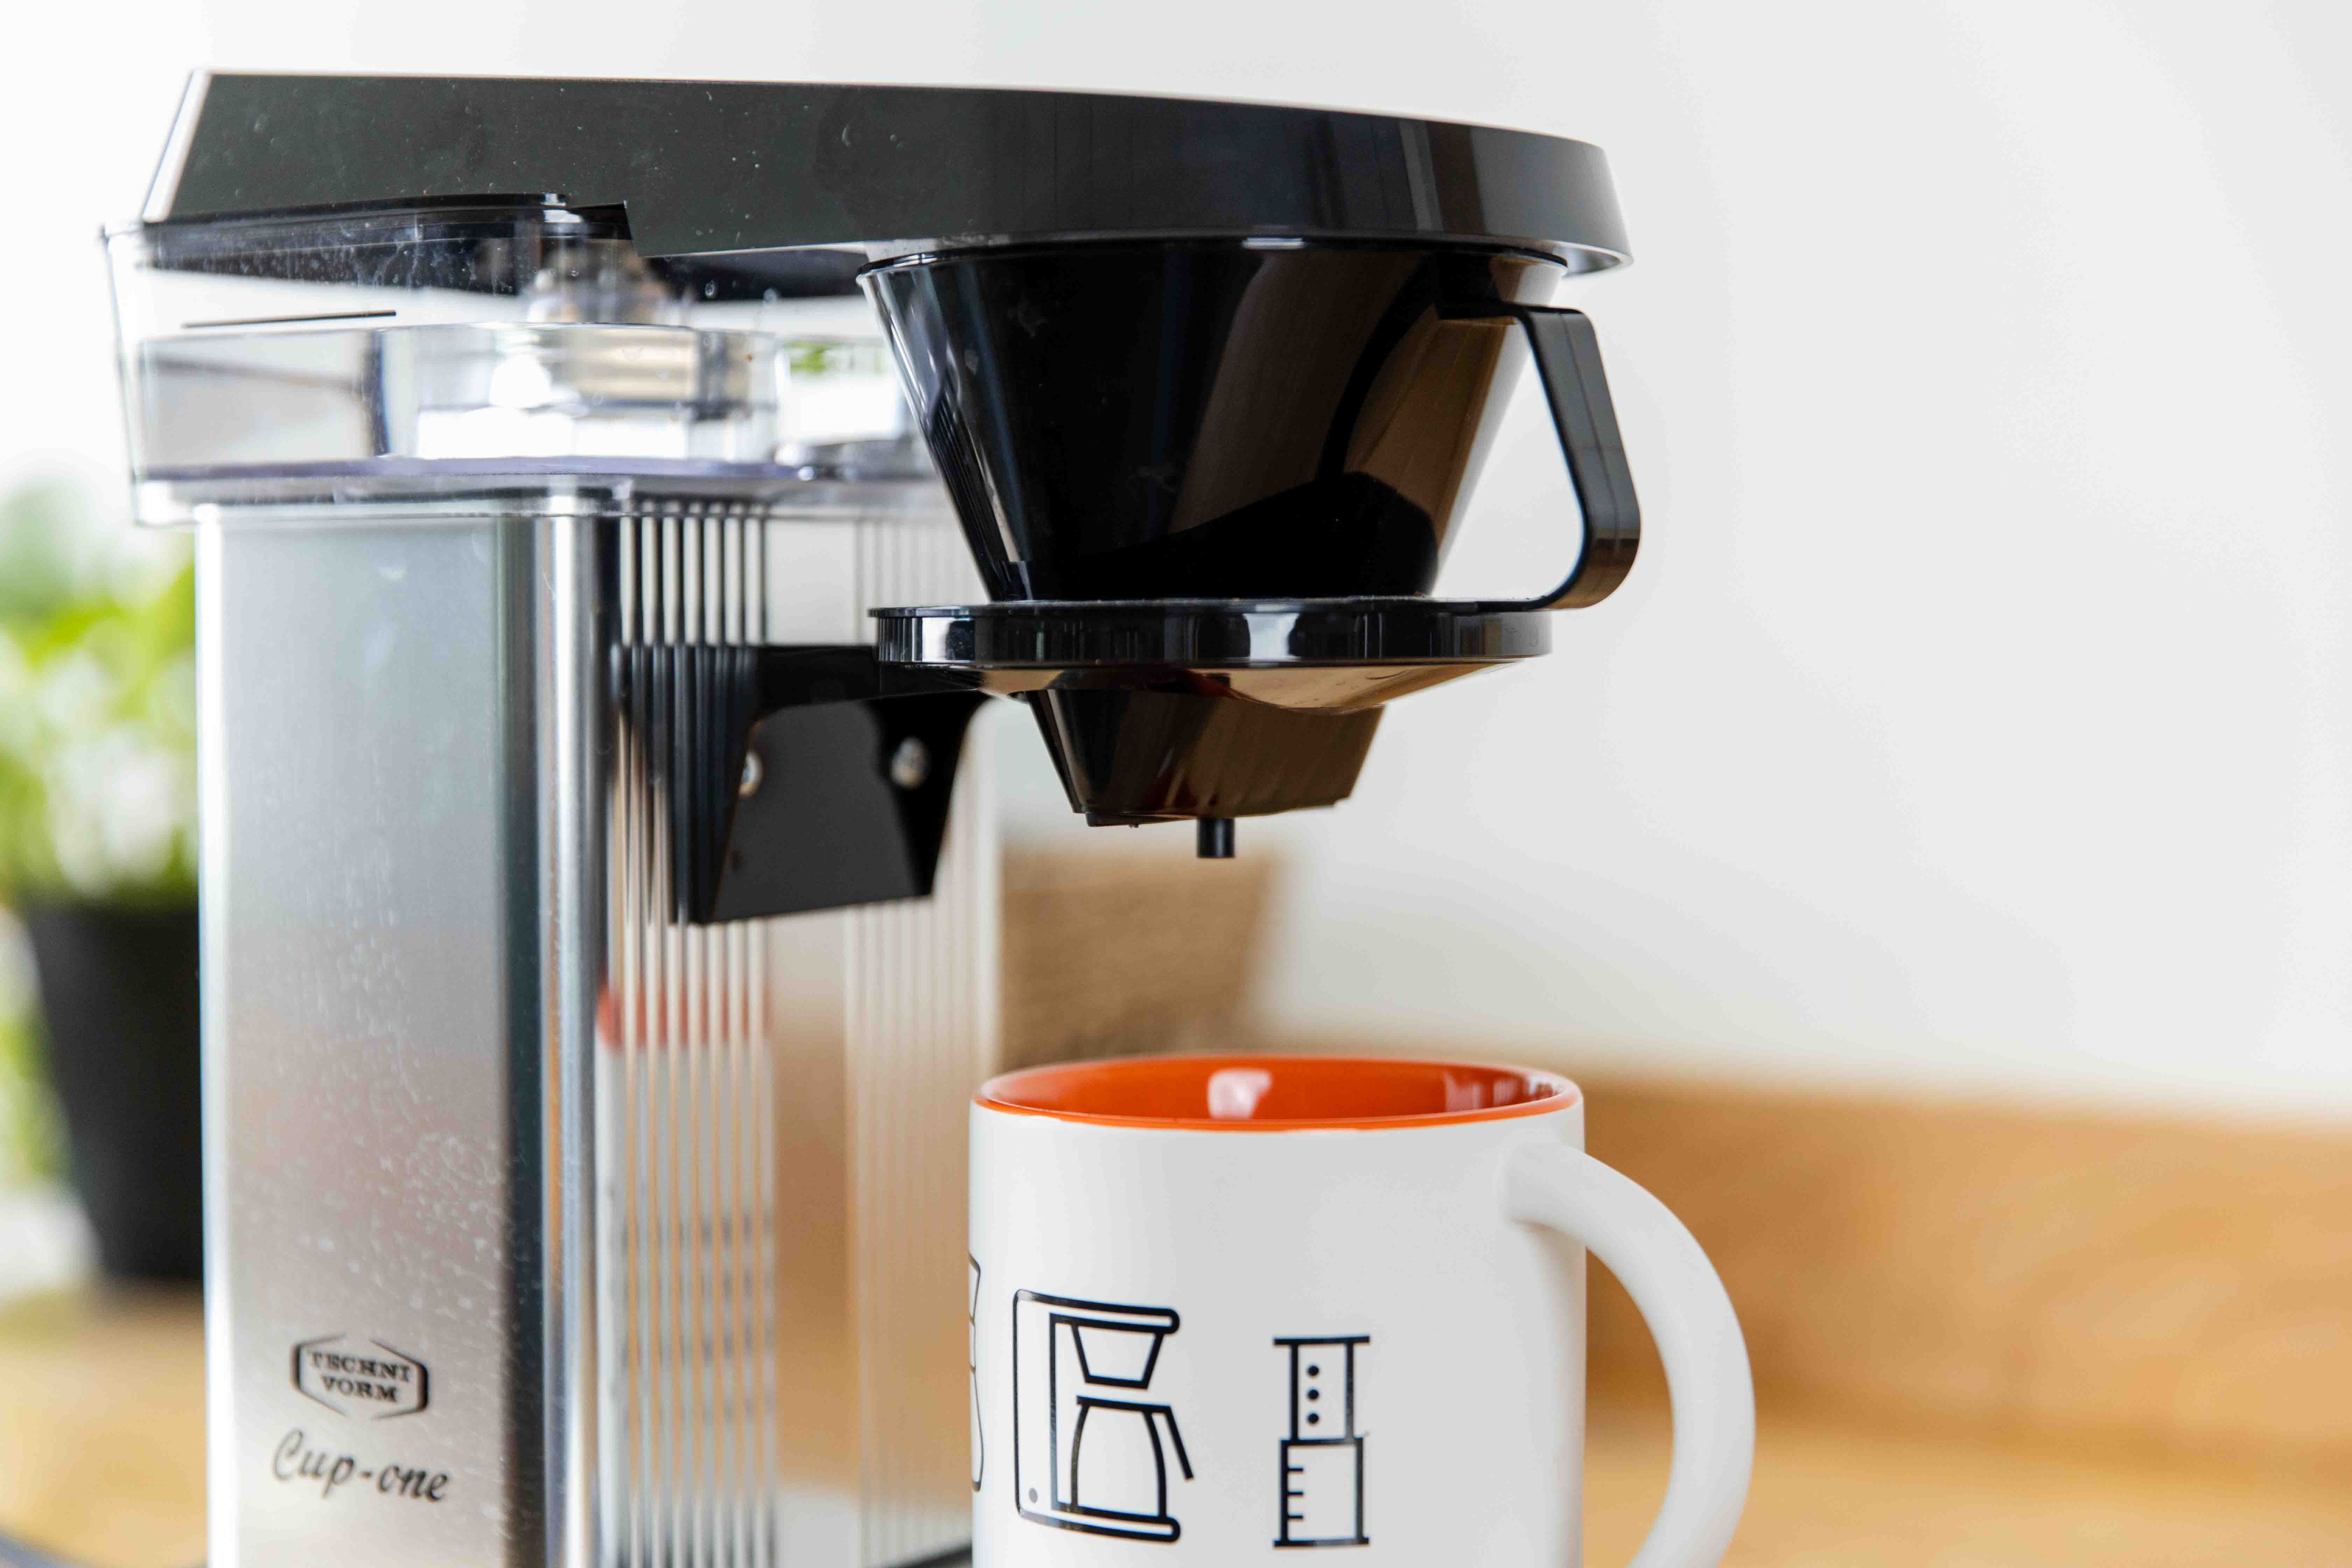 Technivorm Cup-One Coffee Maker Up Close